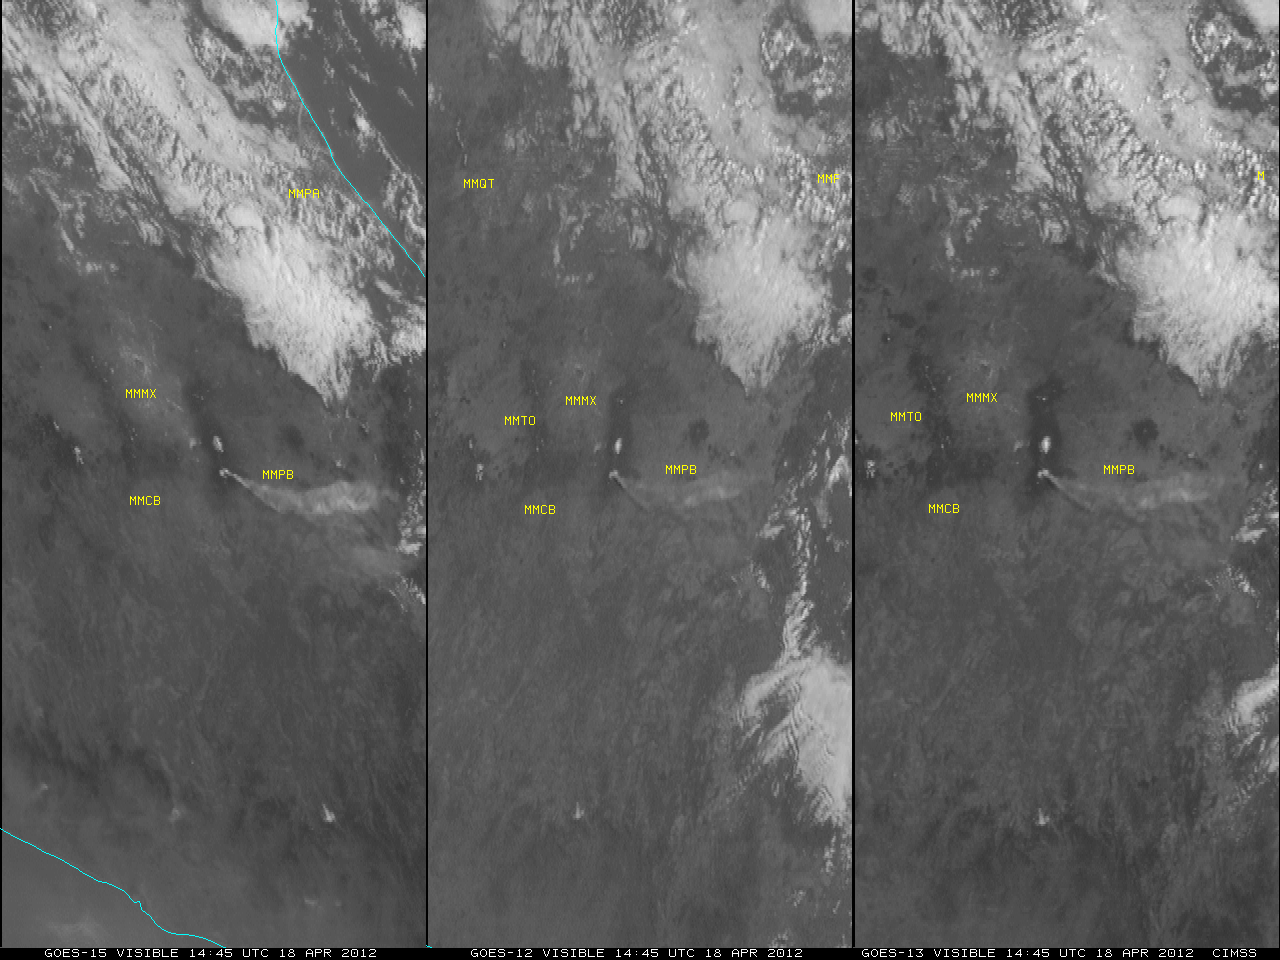 GOES-15 (left), GOES-12 (center), and GOES-13 (right) visible channel images (click image to play animation)